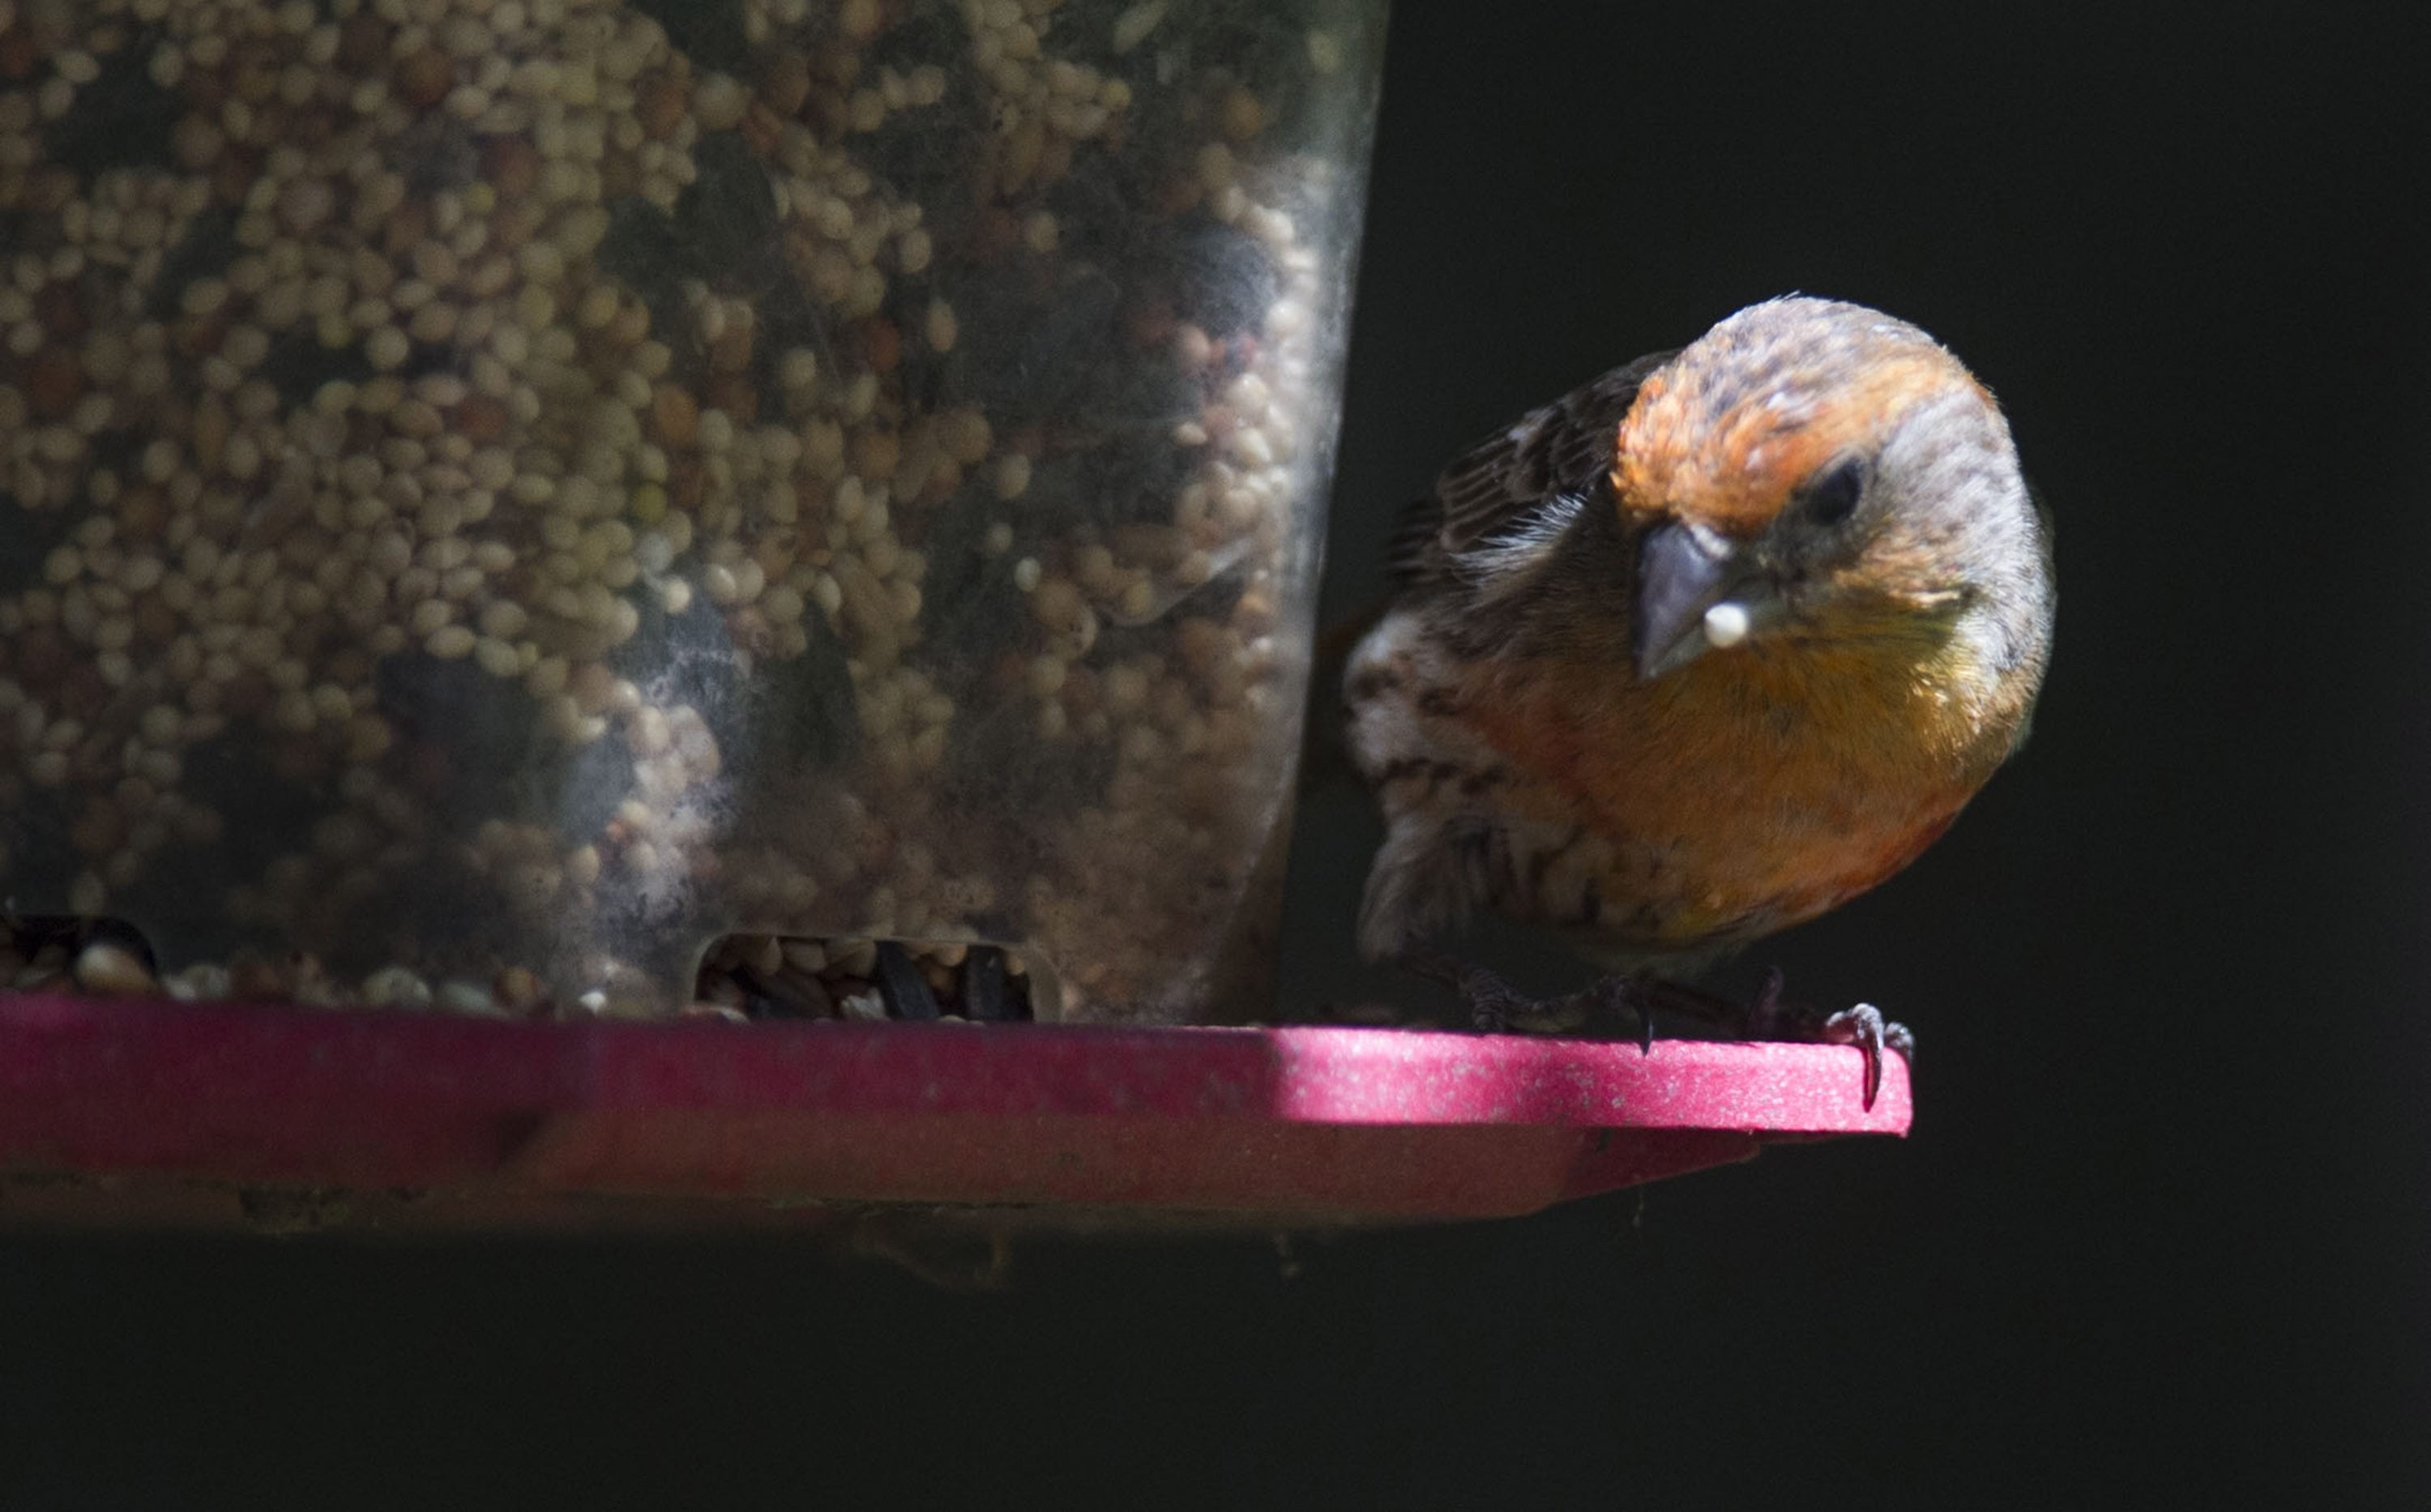 The National Audubon Society is among the groups that say feeders can be good for birds, as long as one follows guidelines for proper feed and sanitation.